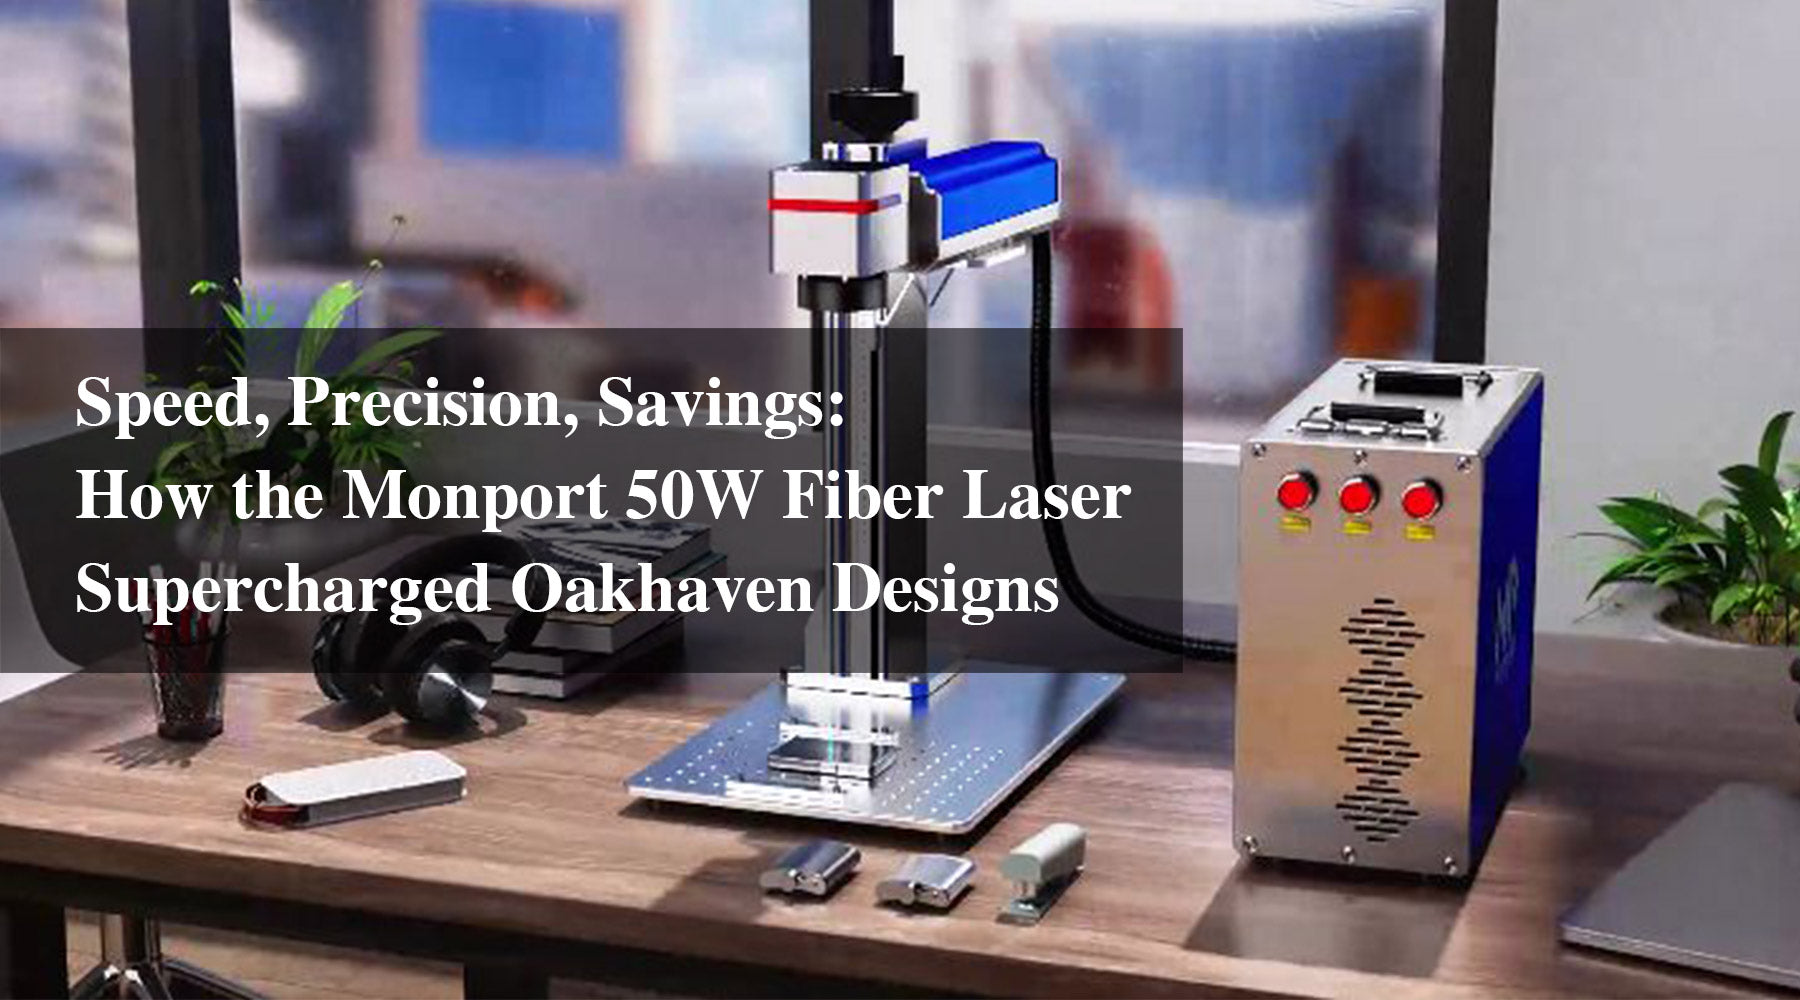 Speed, Precision, Savings: How the Monport 50W Fiber Laser Supercharged Oakhaven Designs